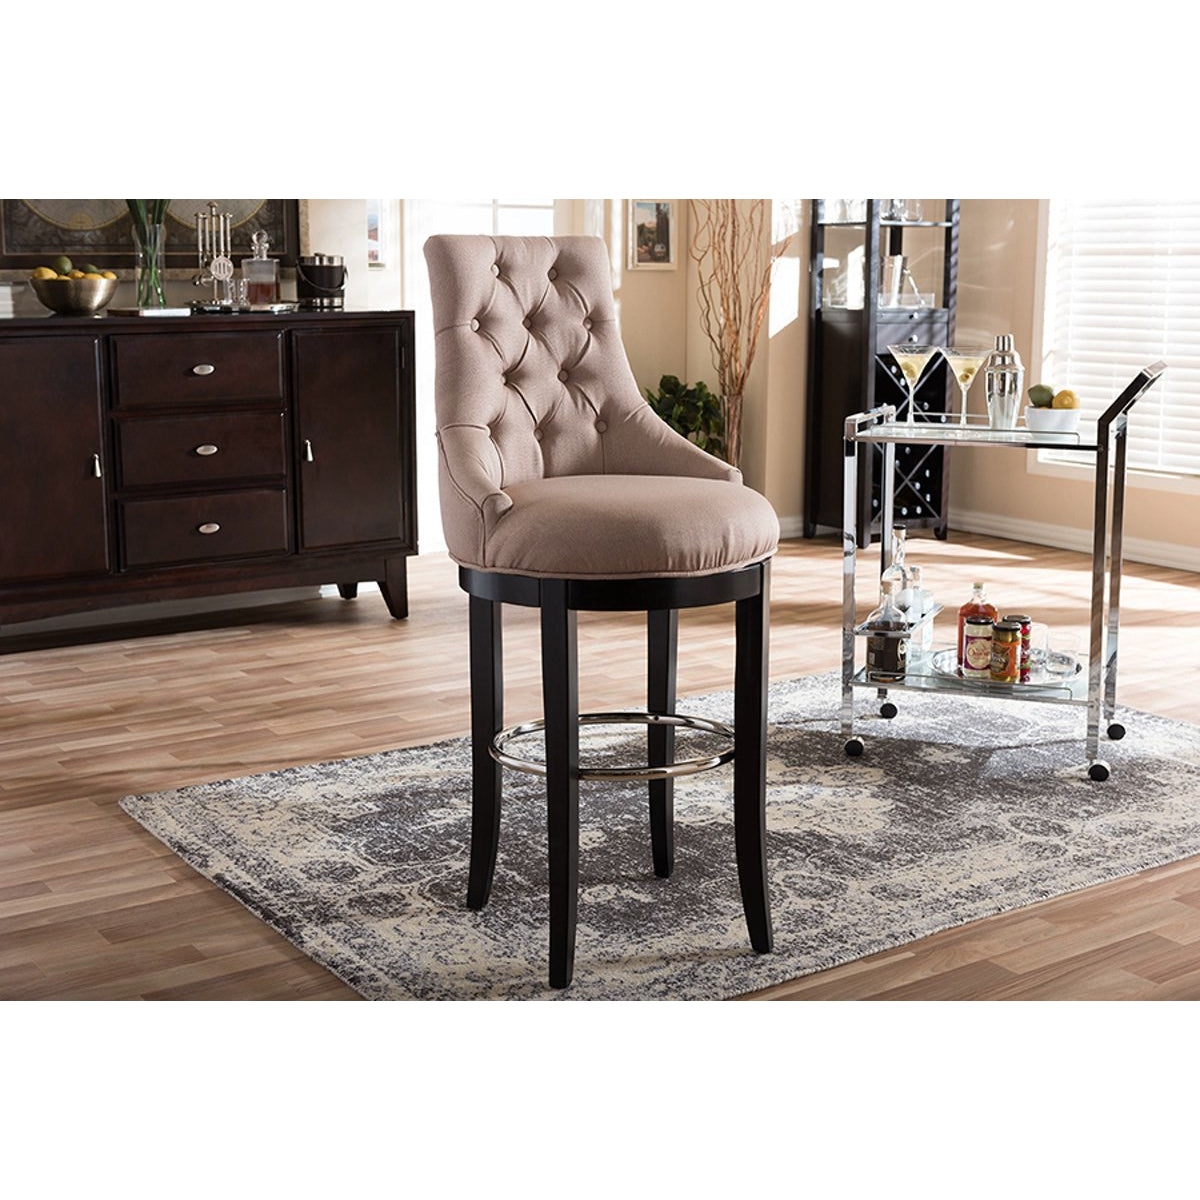 Baxton Studio Harmony Modern and Contemporary Button-tufted Beige Fabric Upholstered Bar Stool with Metal Footrest Baxton Studio-Bar Stools-Minimal And Modern - 6